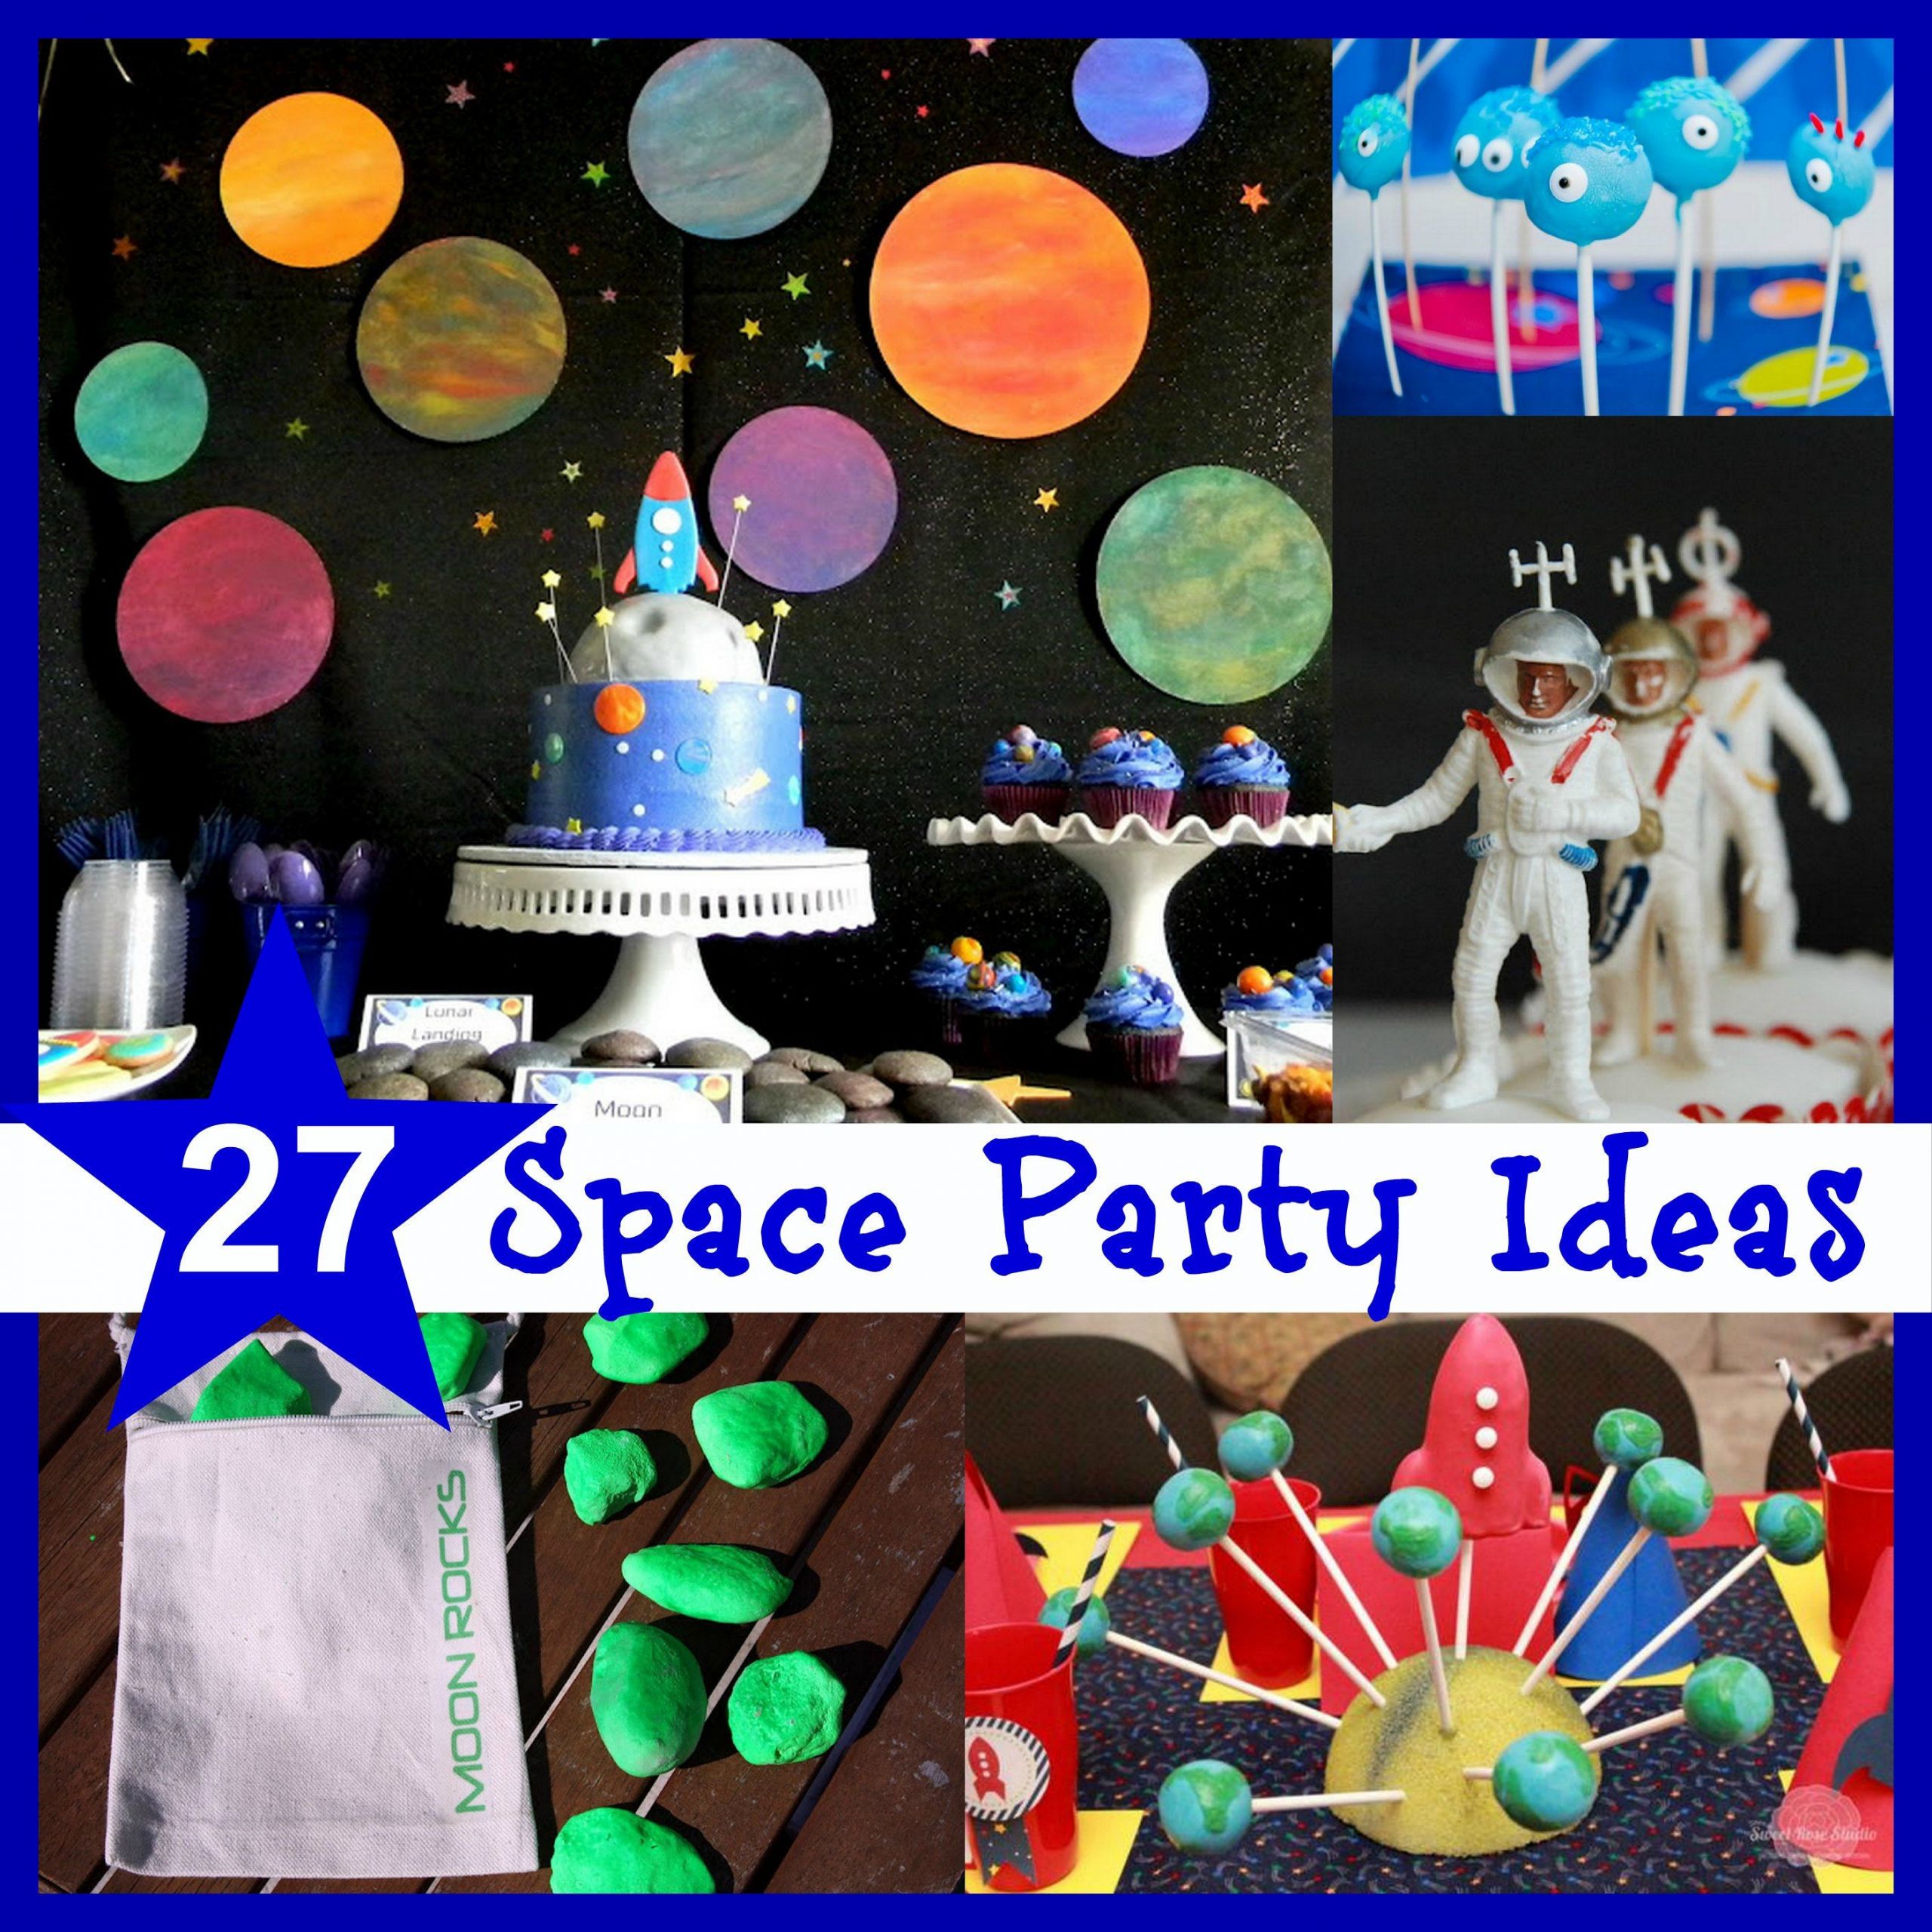 Outer Space Decorations DIY
 Space party ideas and inspiration Make Create Do